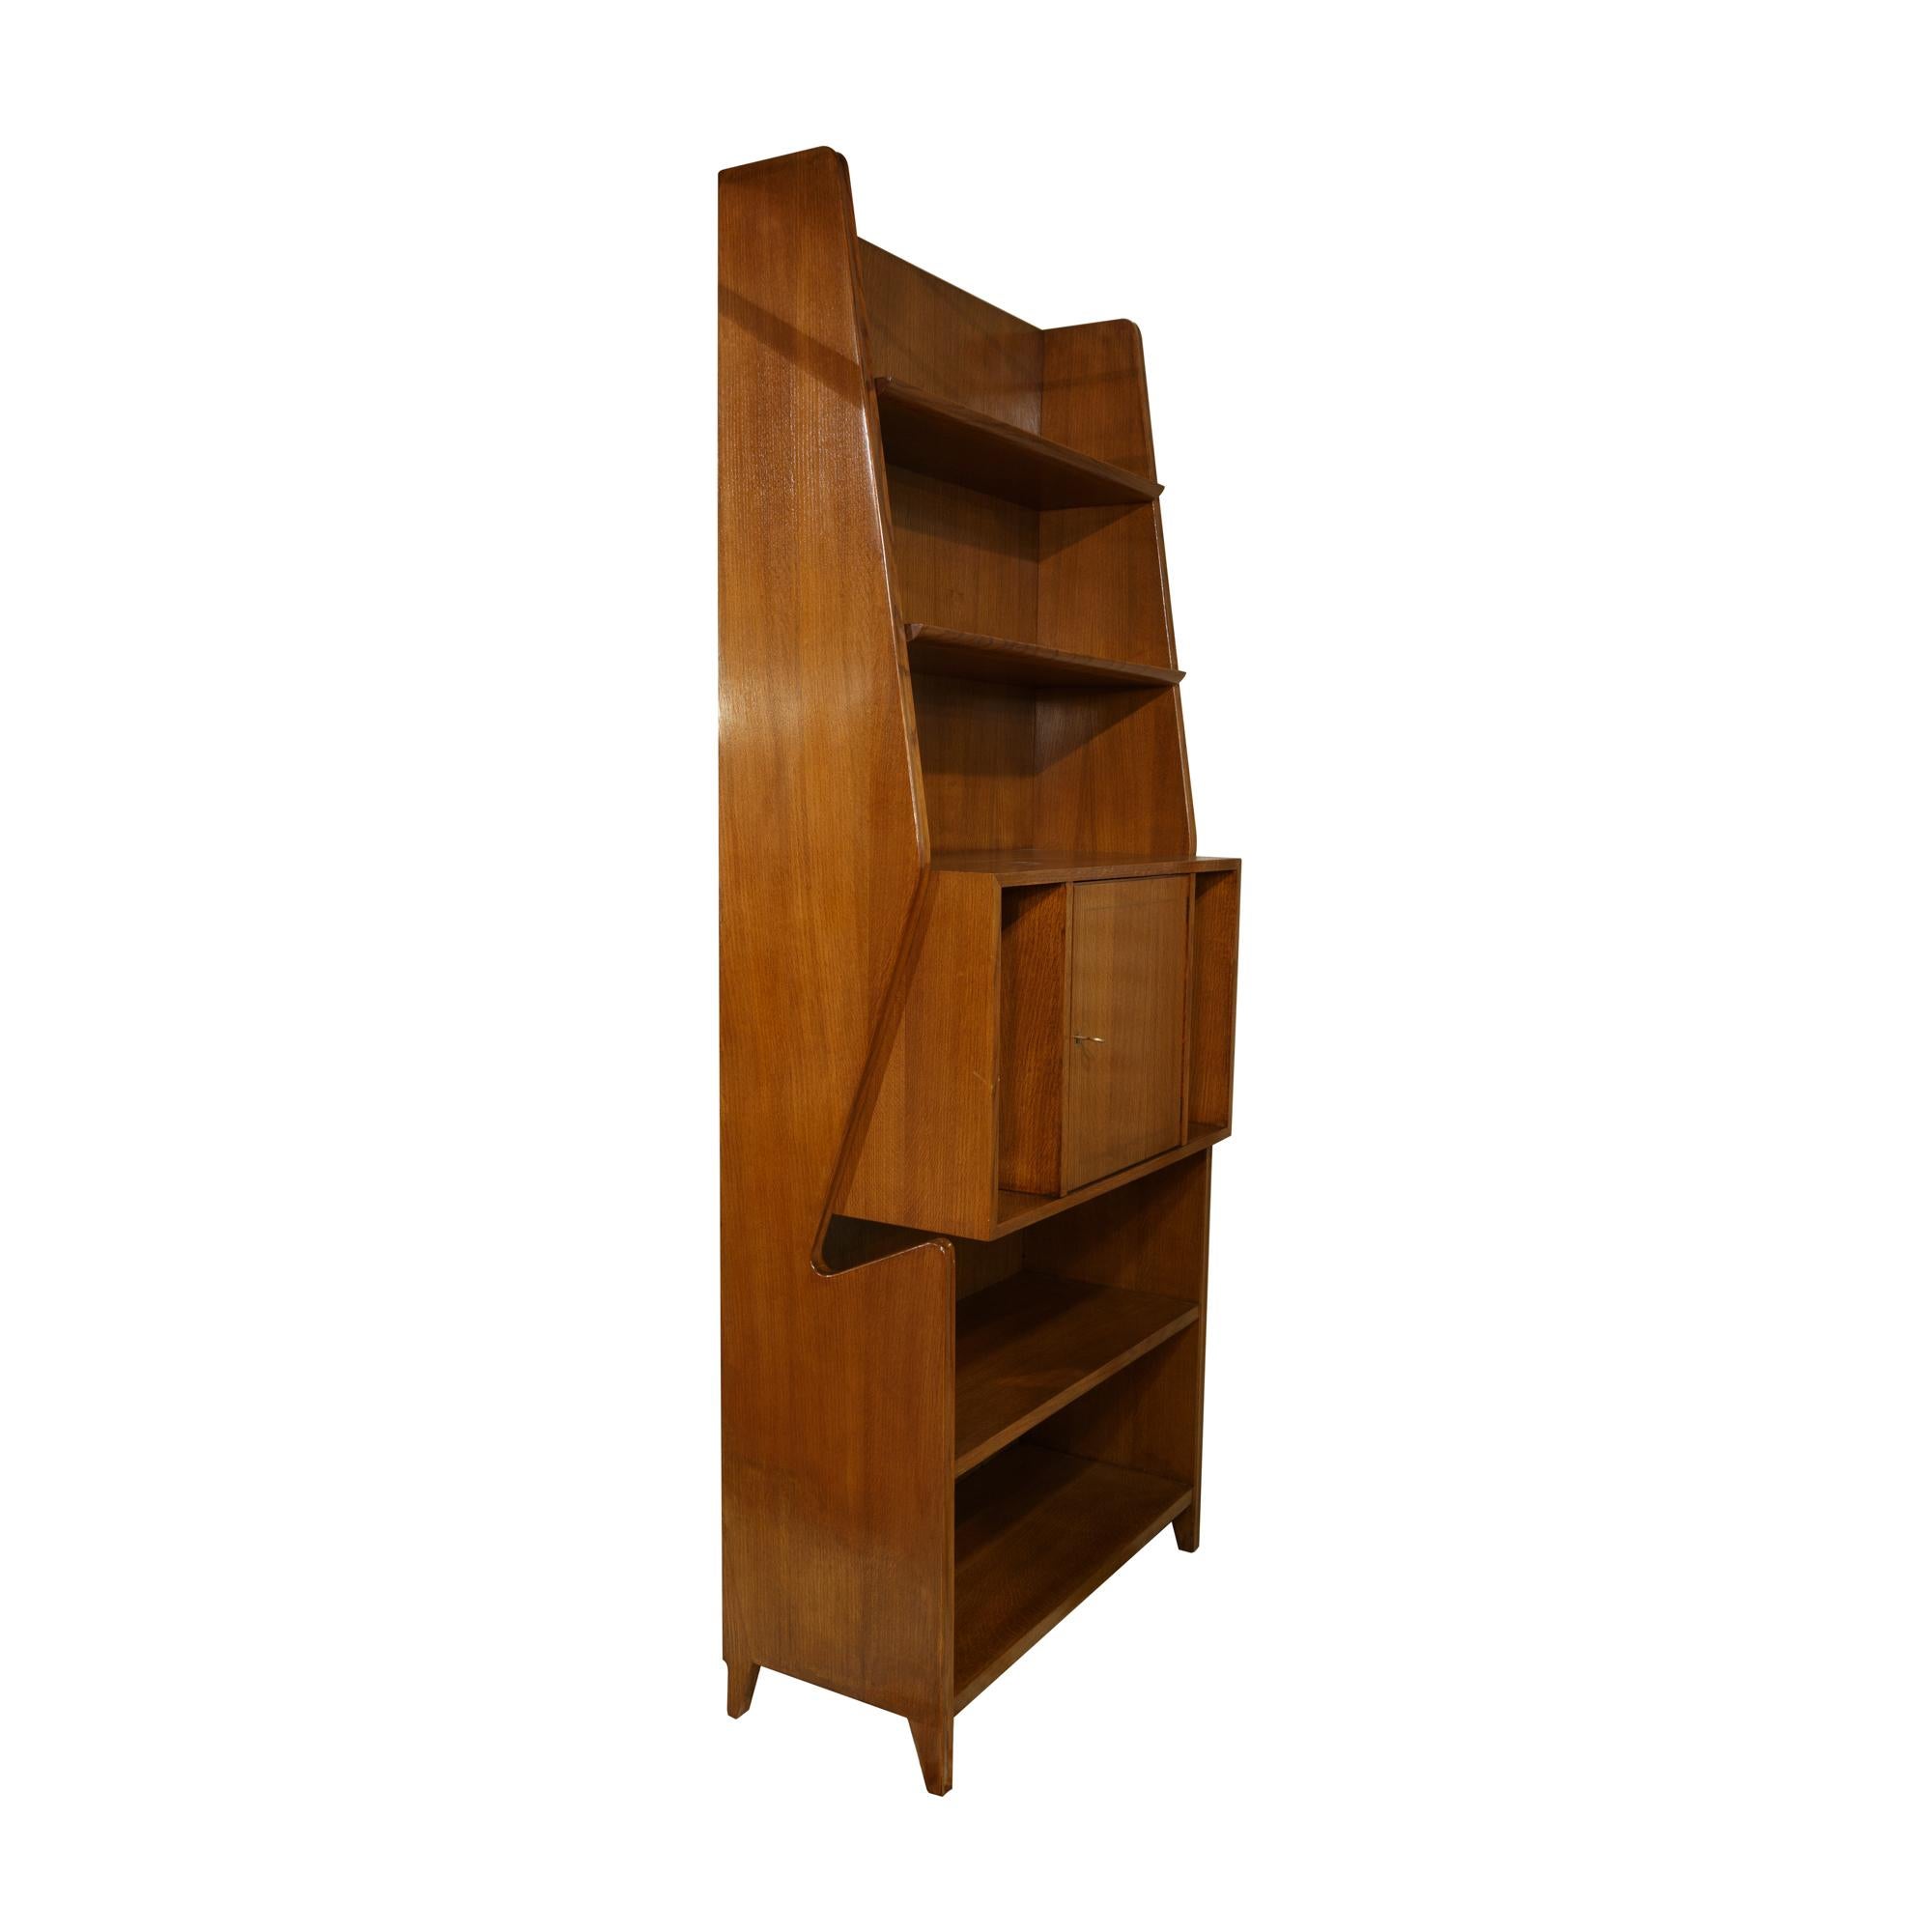 Wood 2 Bookcases Mid-Century Modern in Gio Ponti Style 1950s Italy